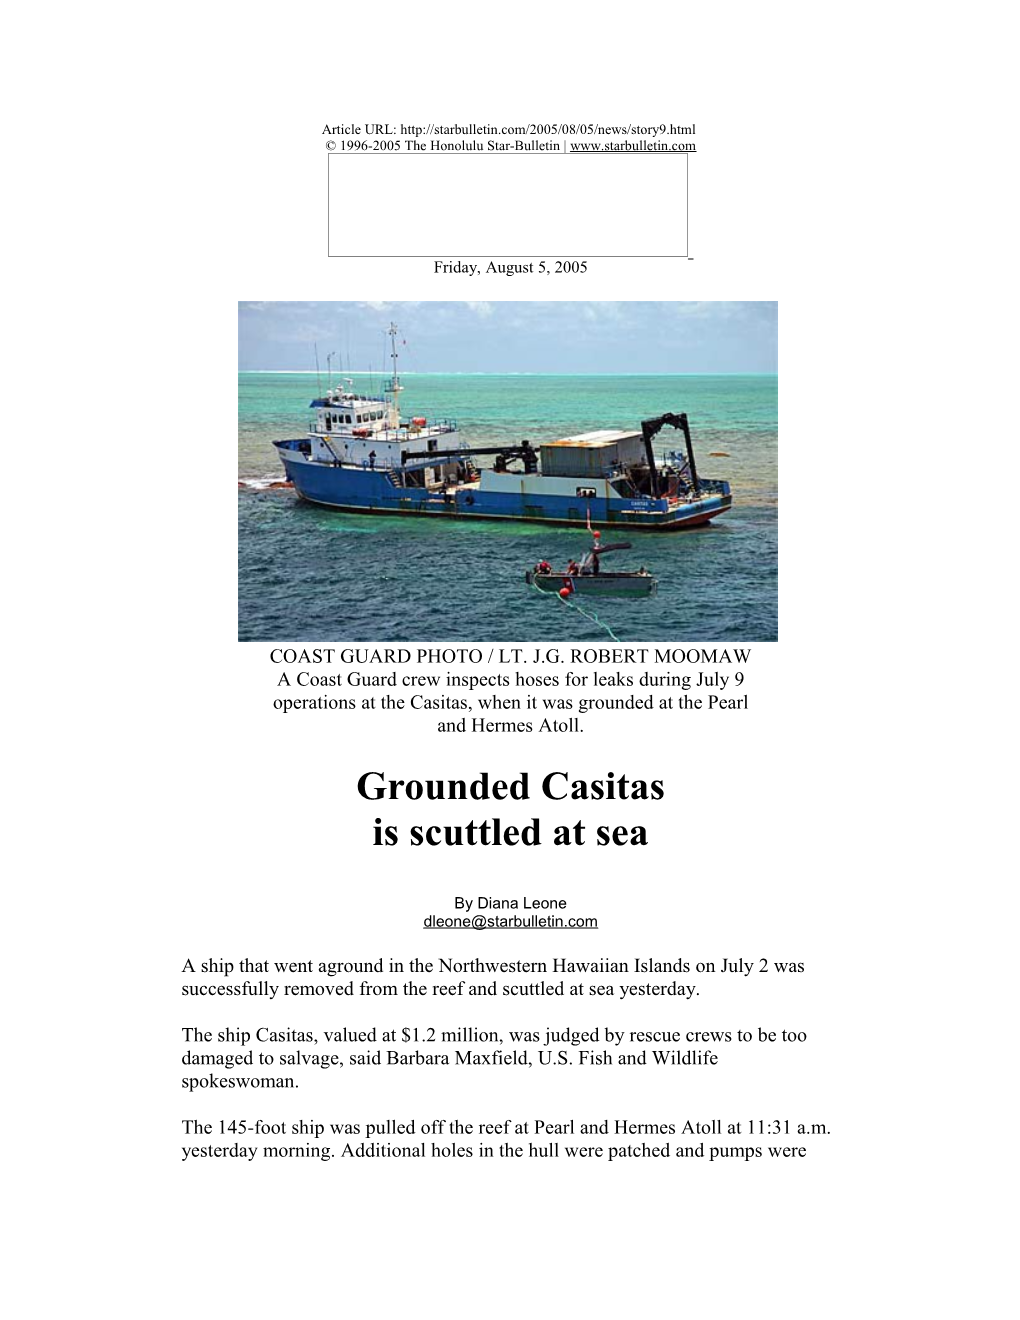 Grounded Casitasis Scuttled at Sea